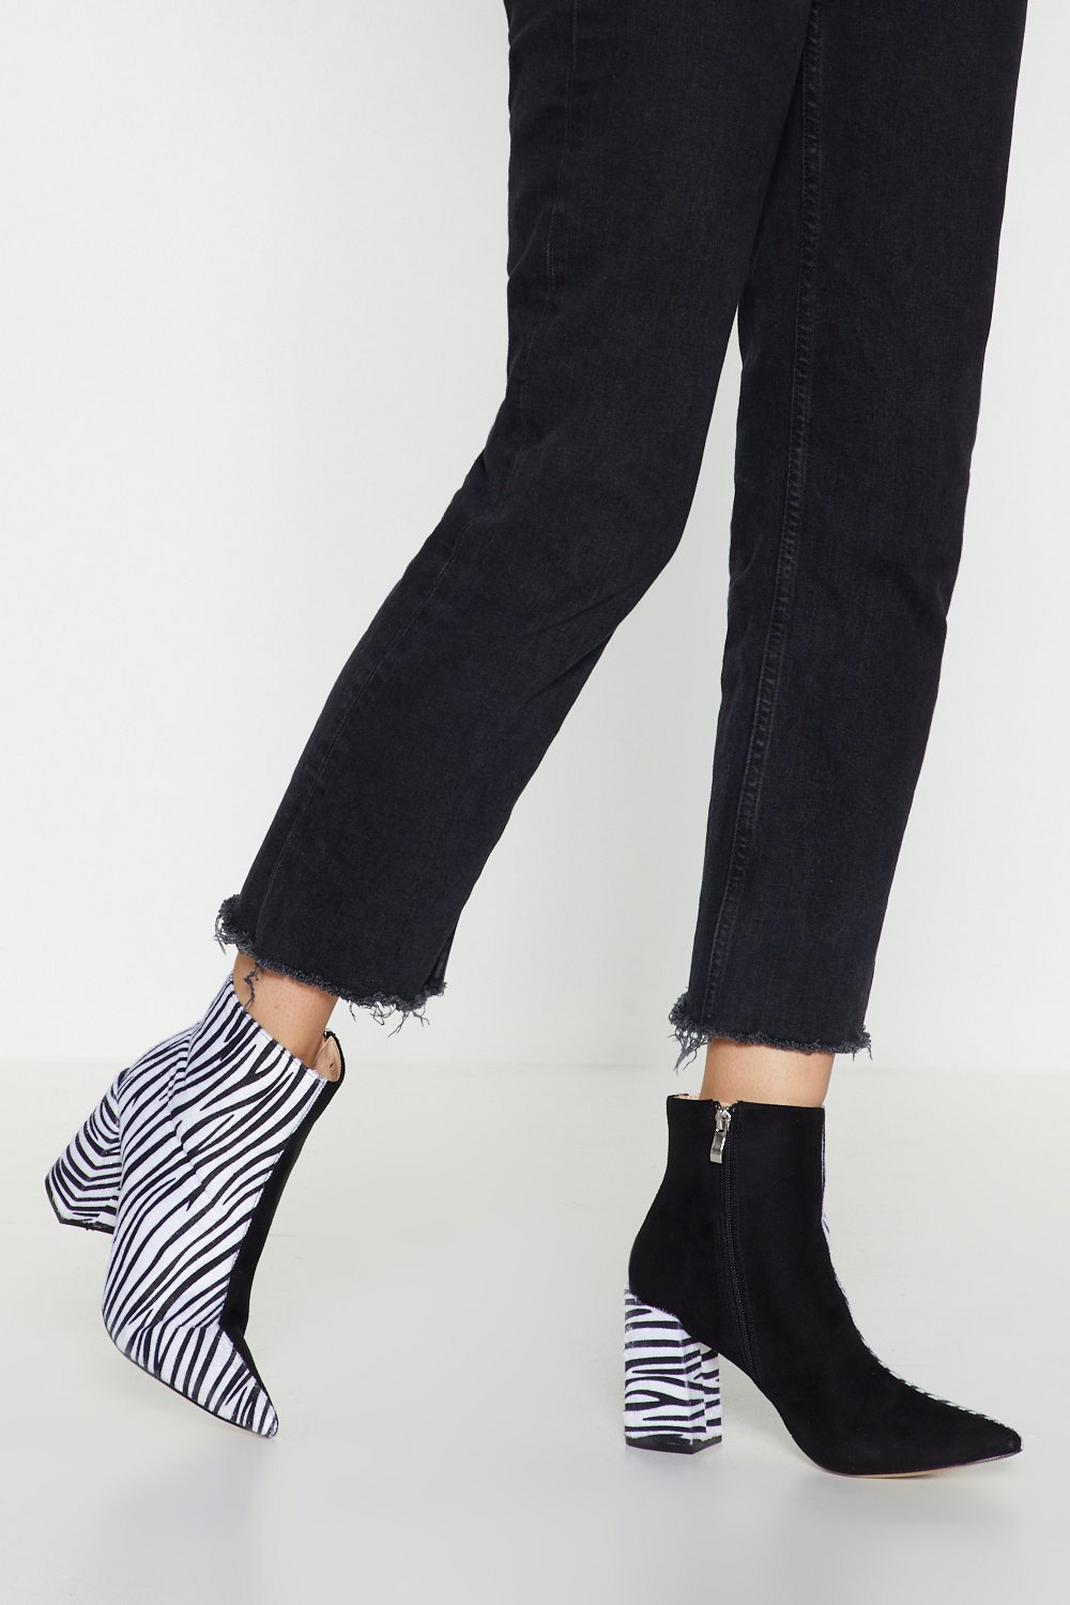 You're in the Two-Tone Zebra Heeled Boot image number 1